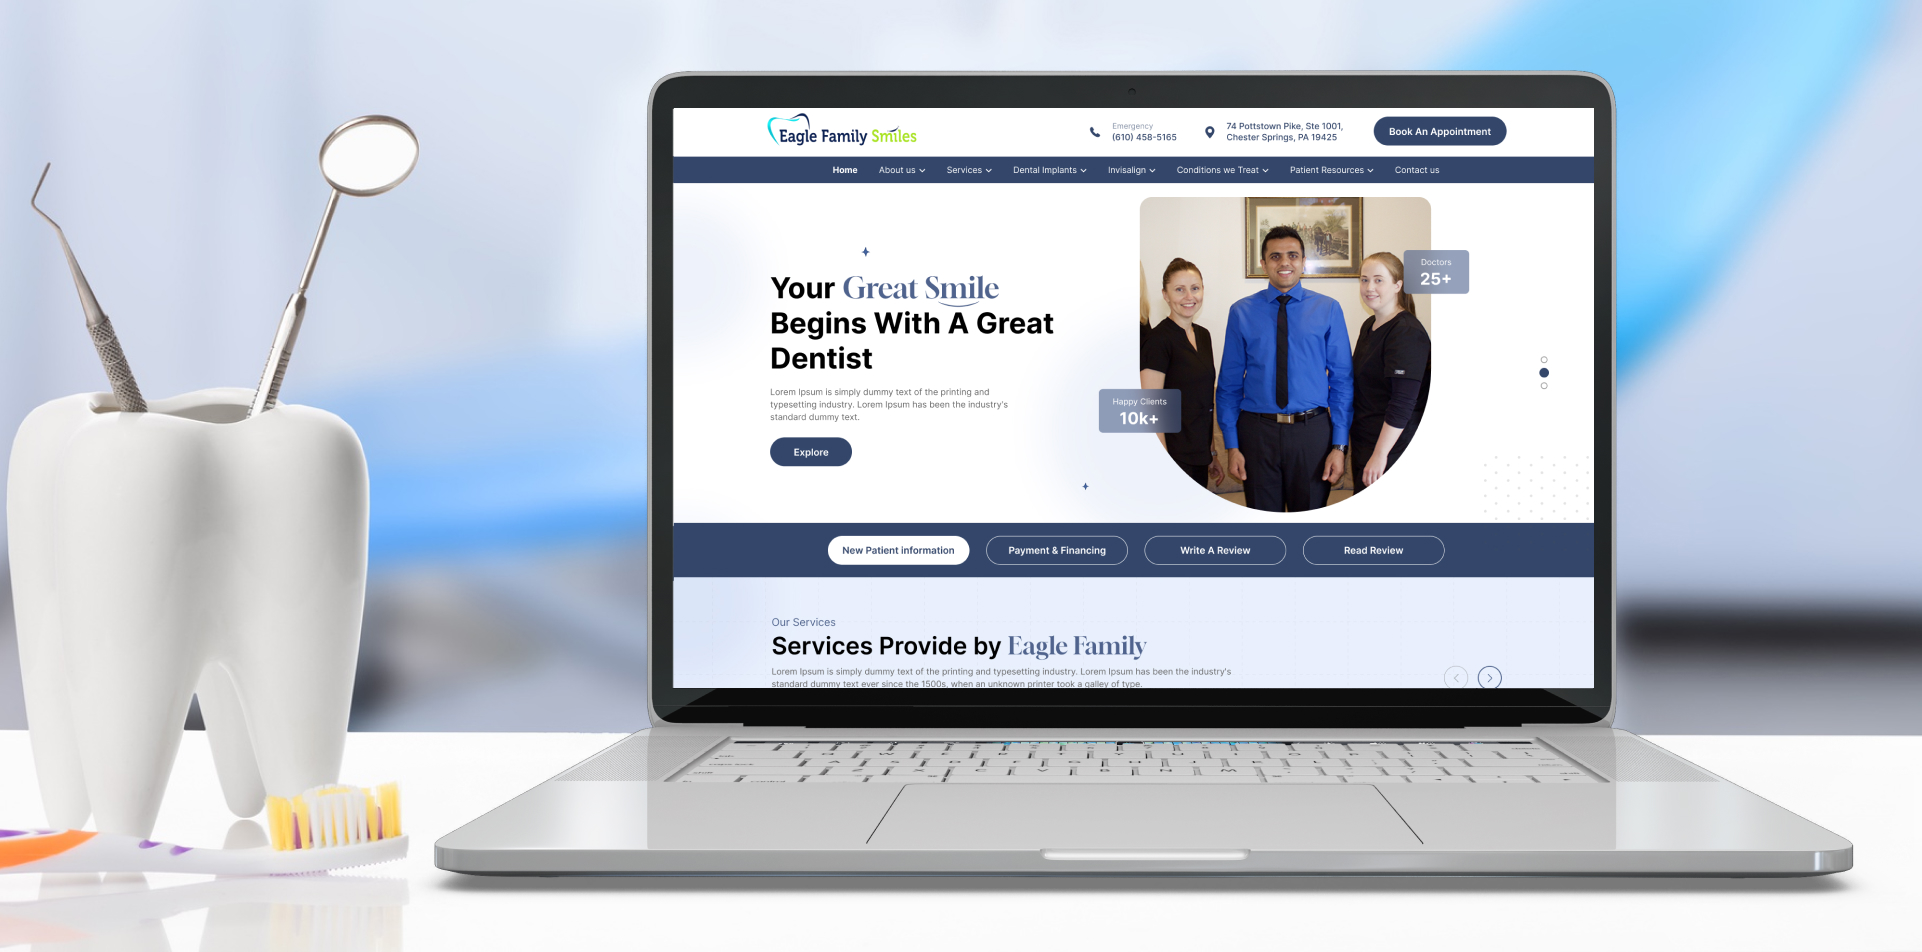 Eagle Family Smiles: How a New Landing Page Sparked Transformation